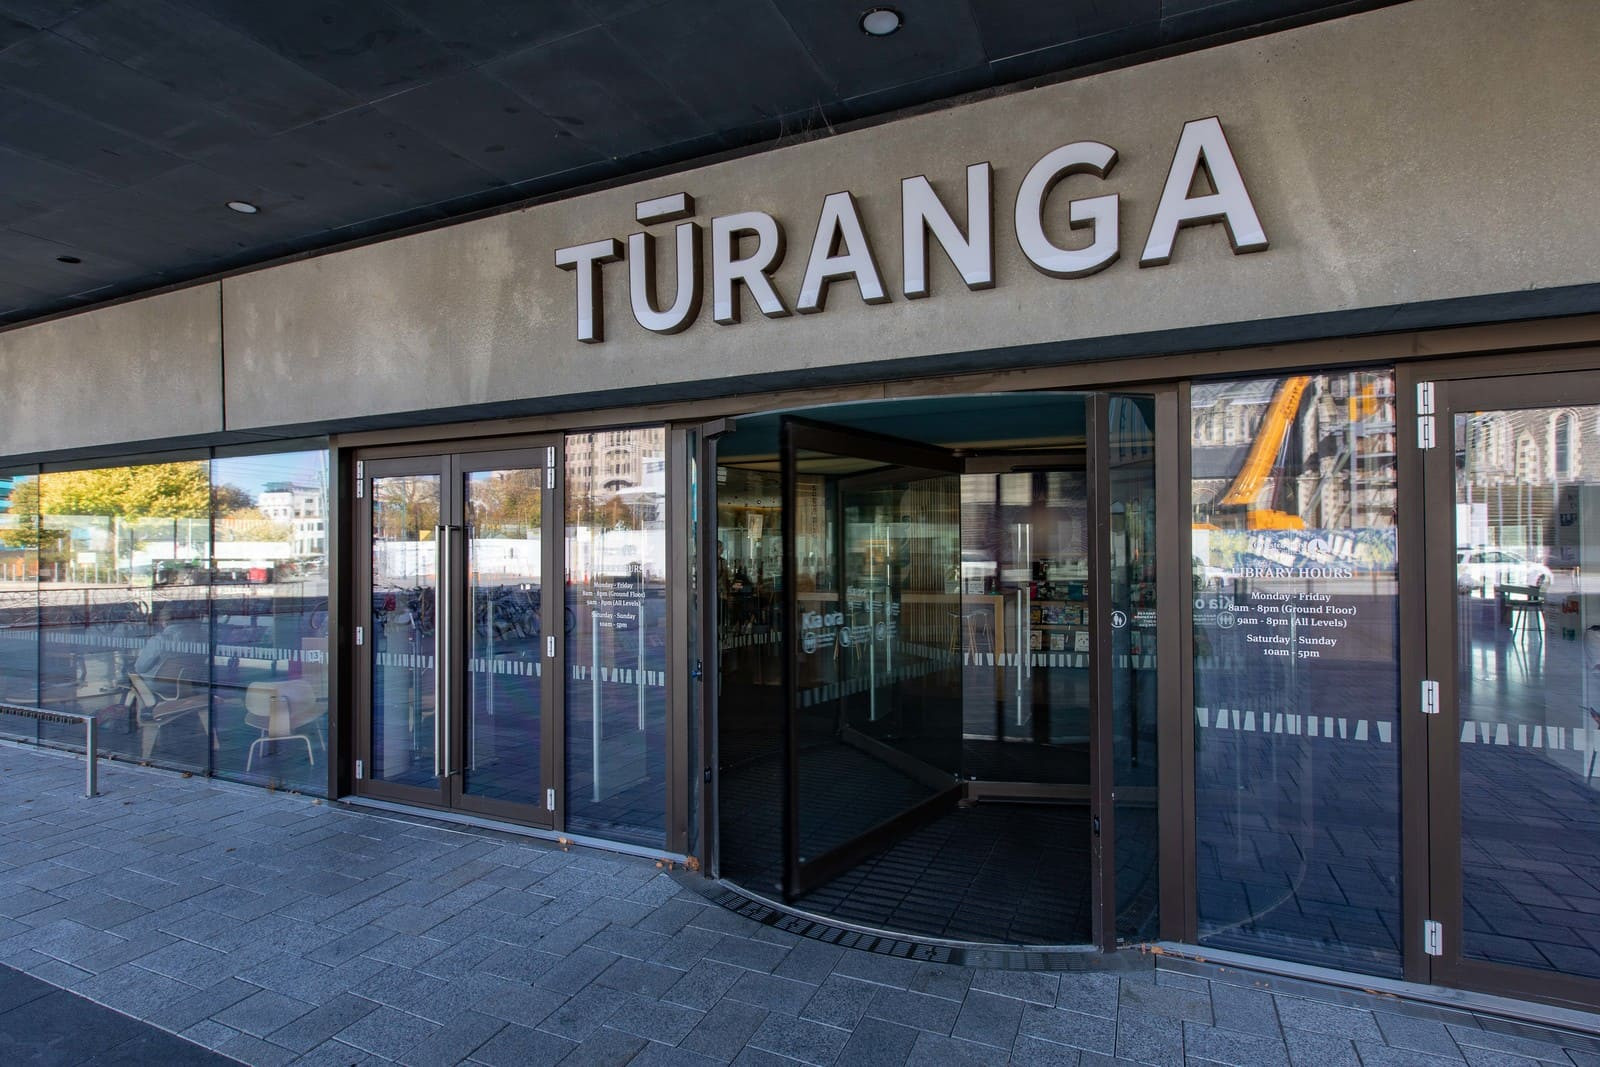 Glass entrance to Christchurch library, 'Turanga' displayed prominently